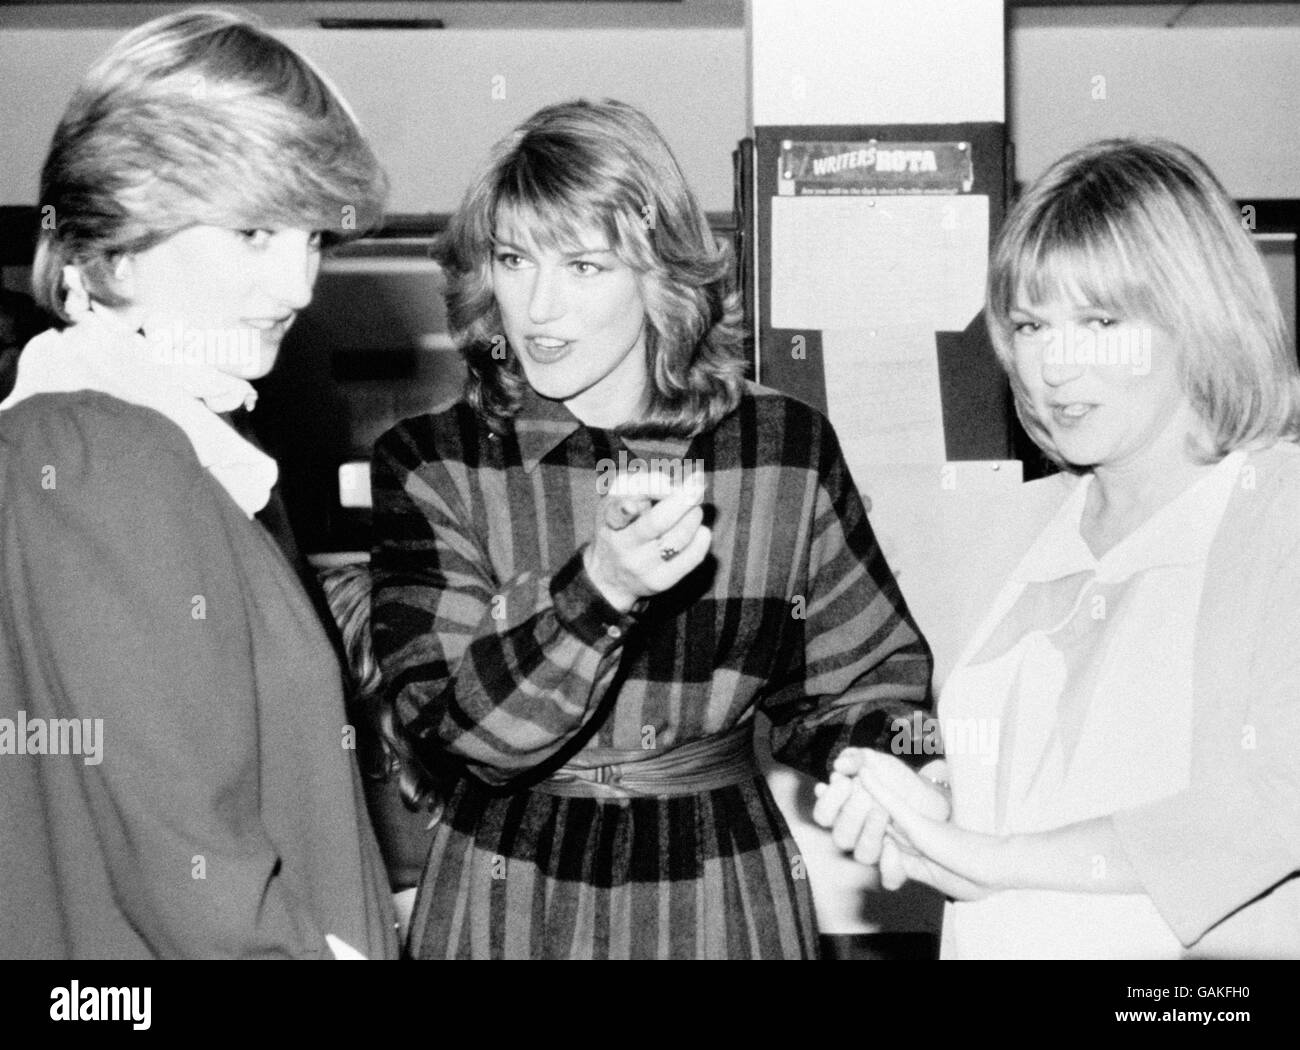 The Princess of Wales, who was expecting her first baby in June, dicussing with Selina Scott (centre) and Carol Barnes the running order for News at 5.45 during her visit to the London Offices of ITN. Carol presented the programme, which the princess watched from the control room. Stock Photo